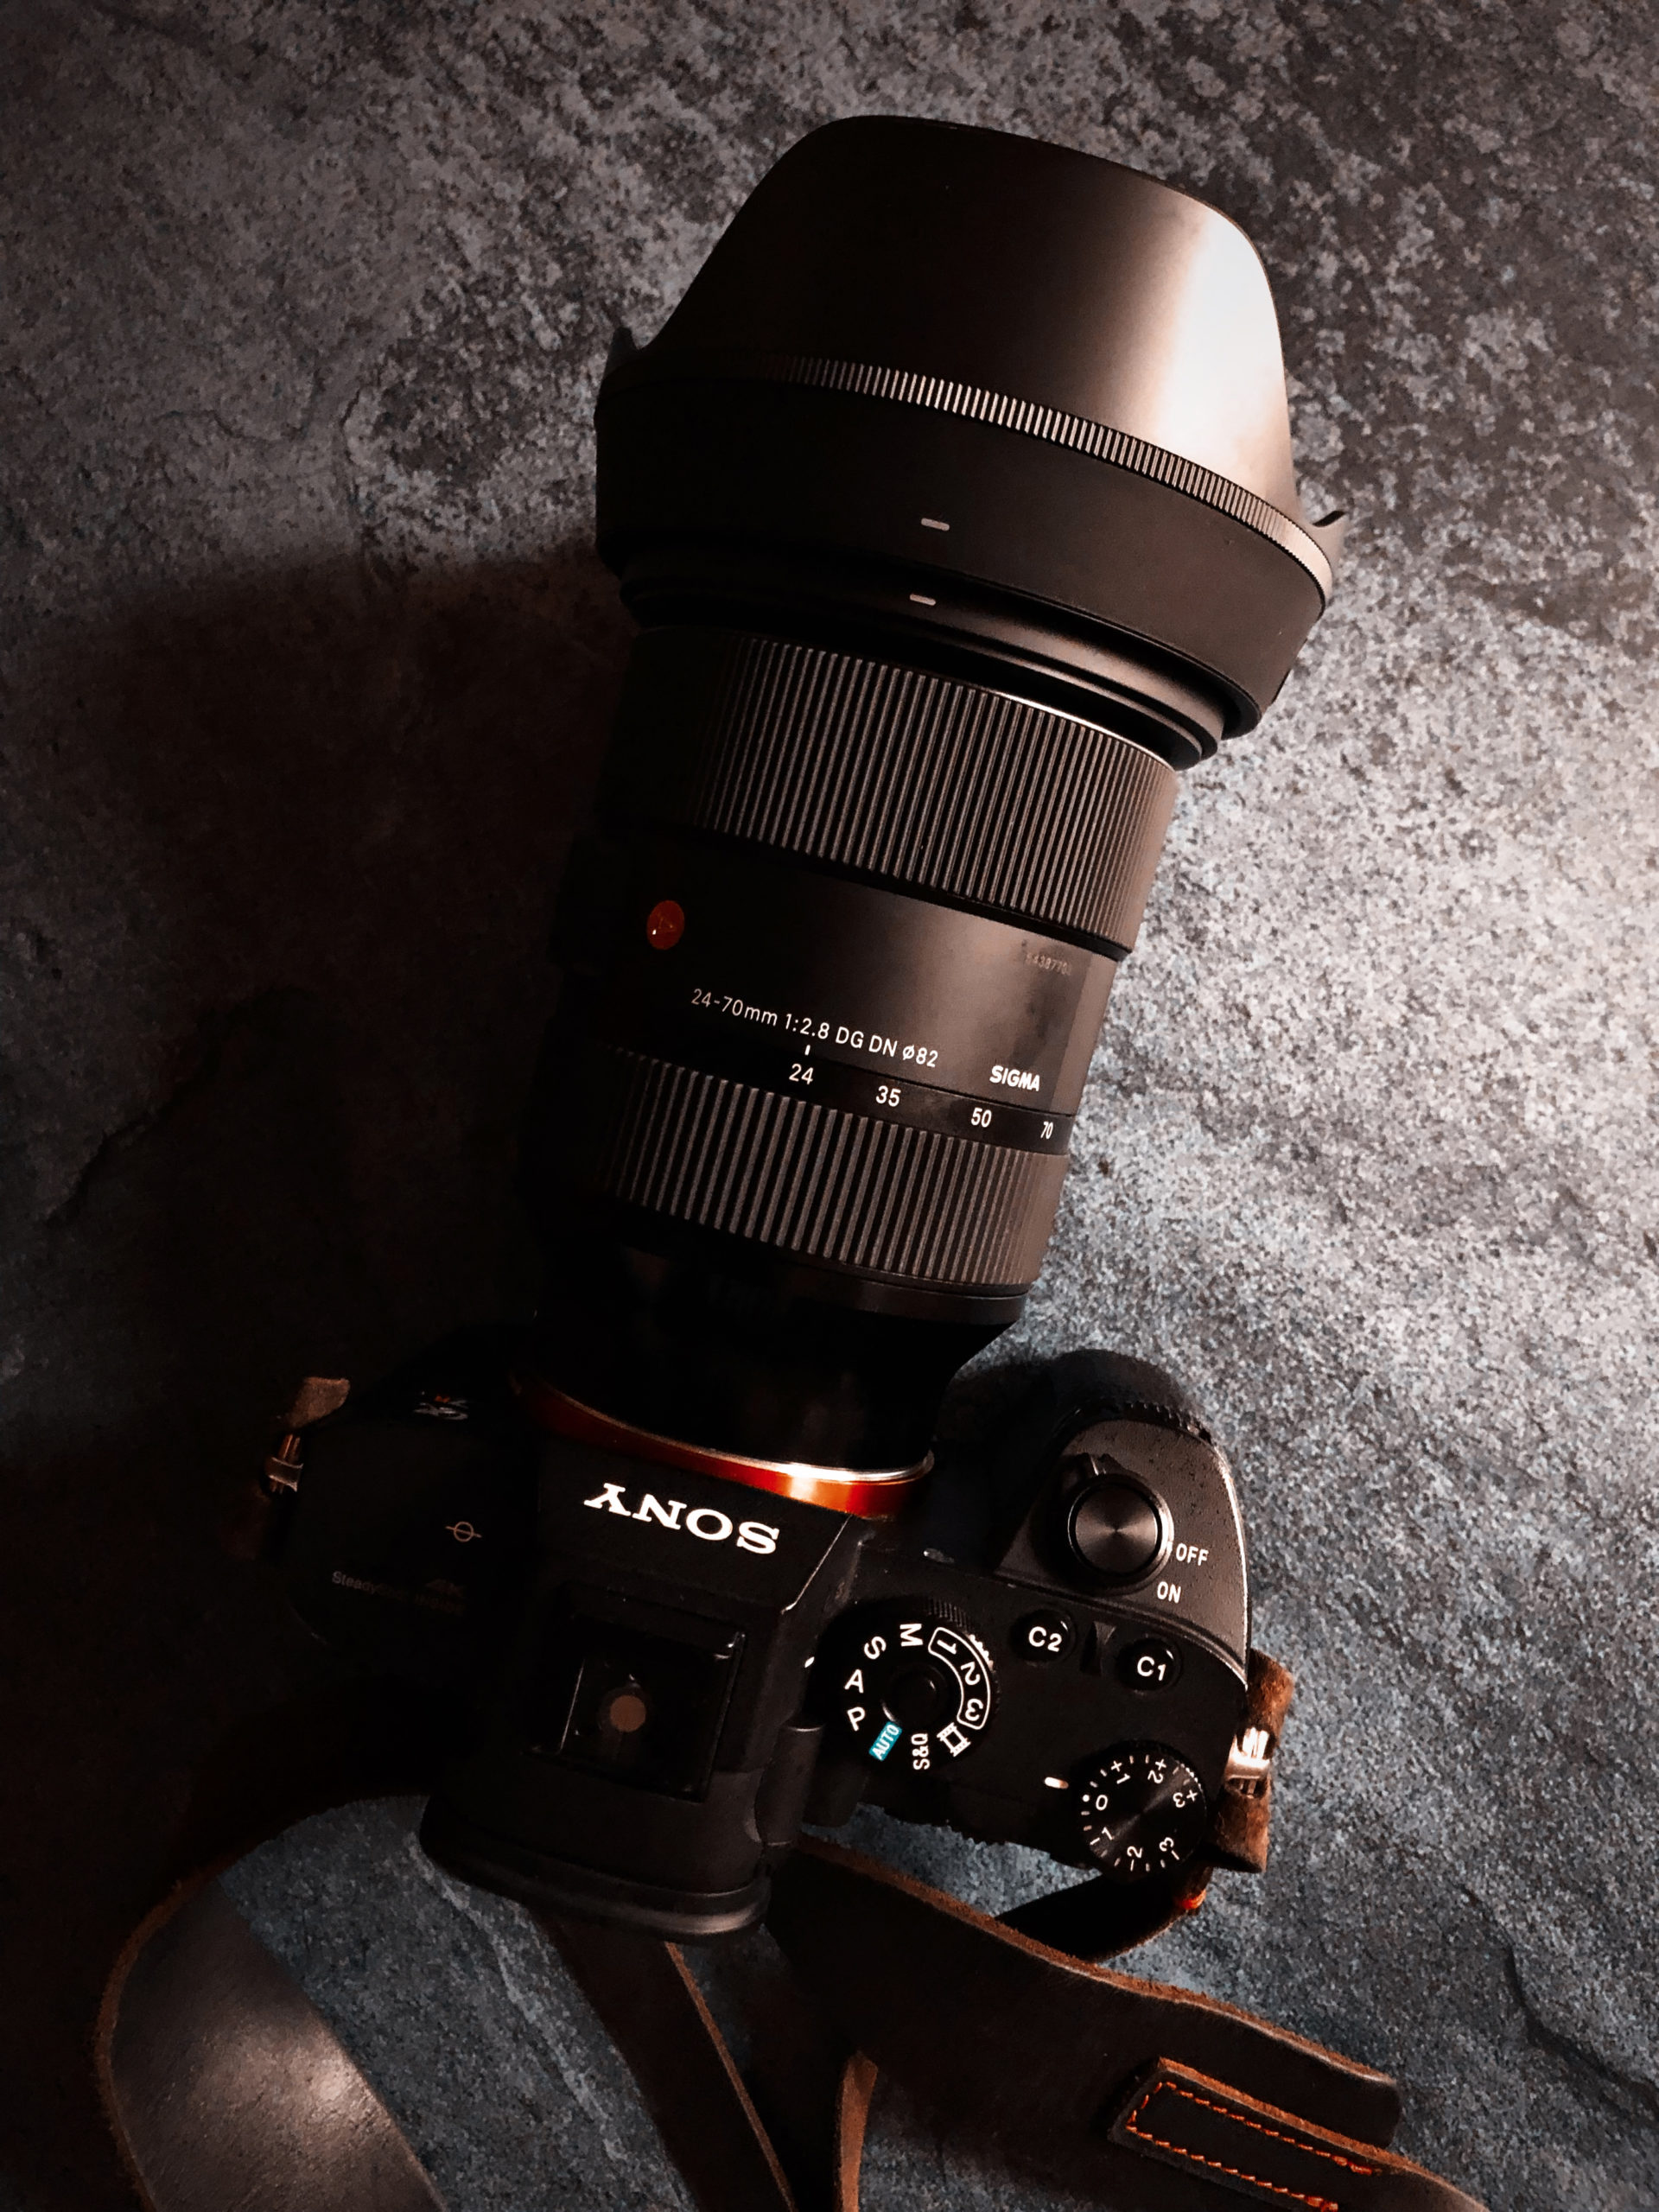 Why the Sigma 24-70mm f2.8 DG DN Art Doesn't Have Stabilization